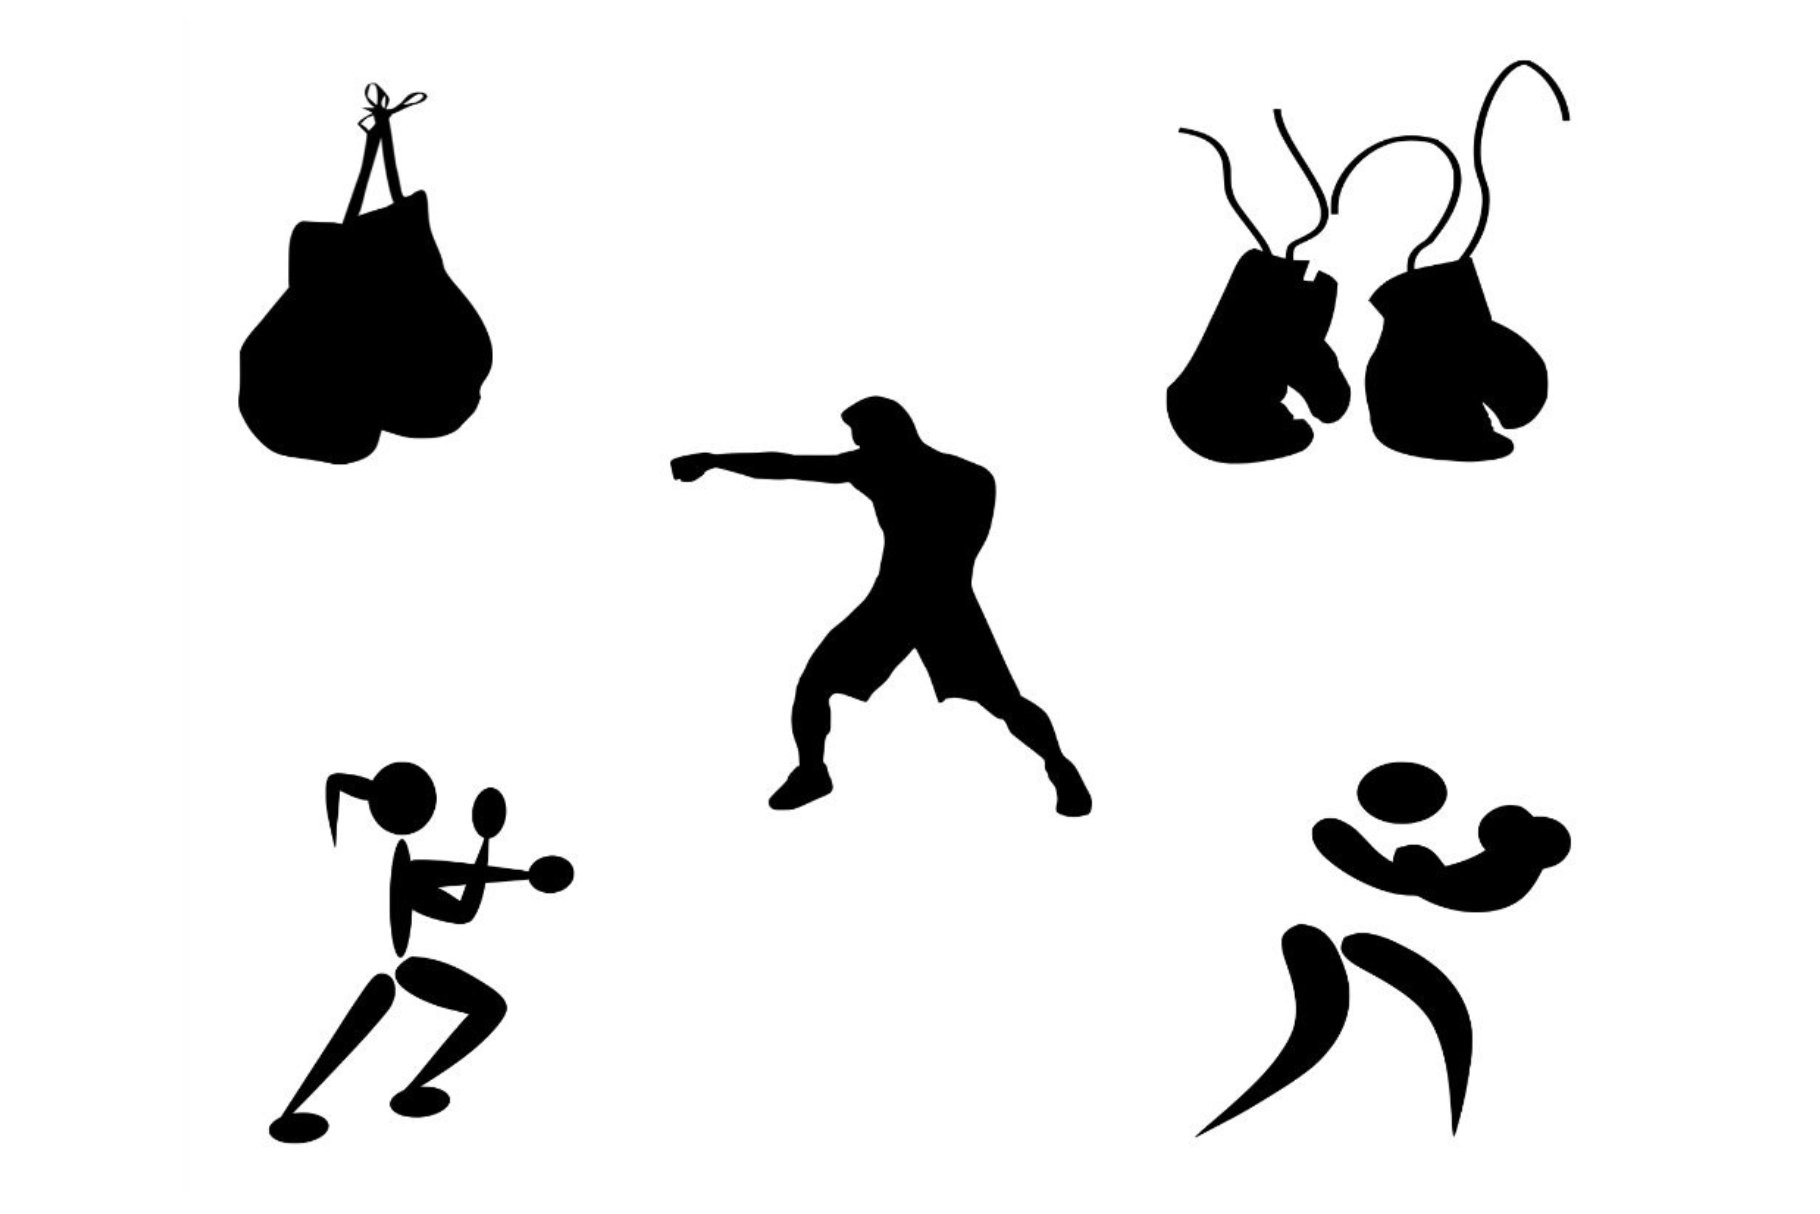 Boxing Silhouette cover image.